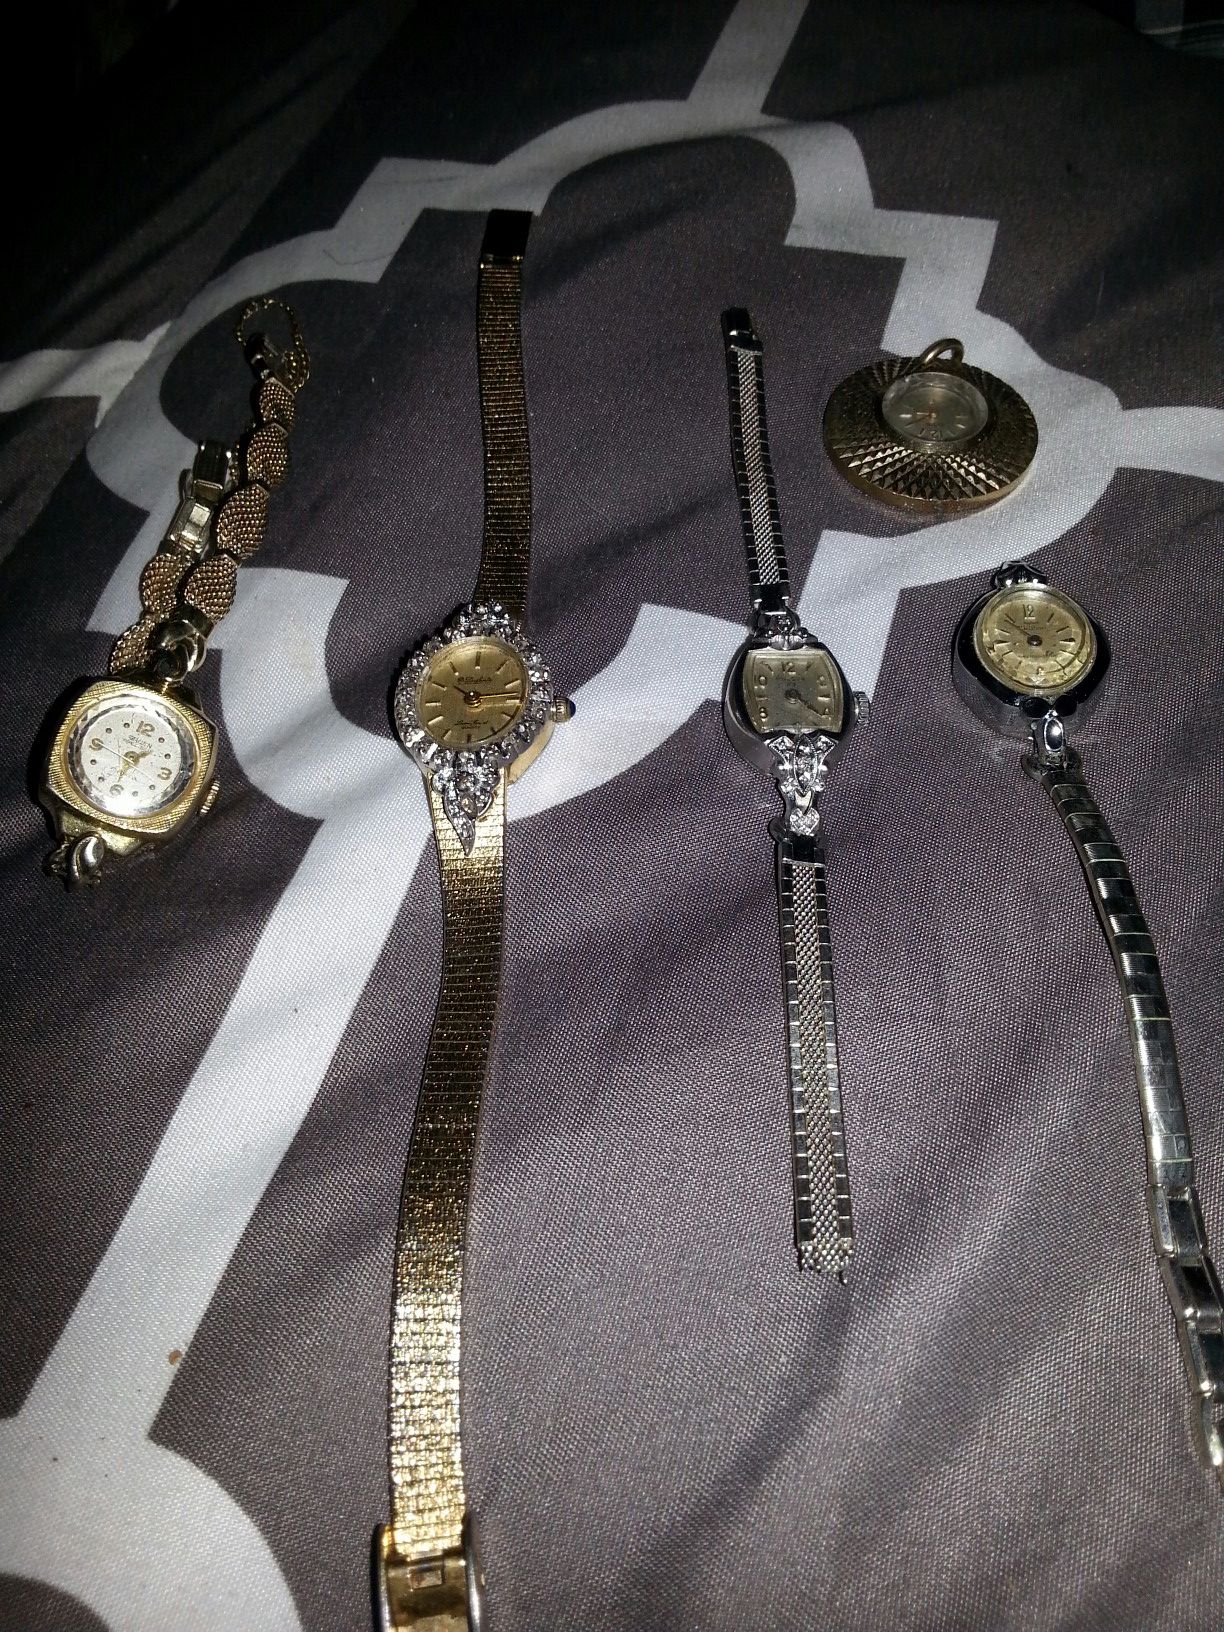 Vintage women watches and 3 Brand new Zippo lighters